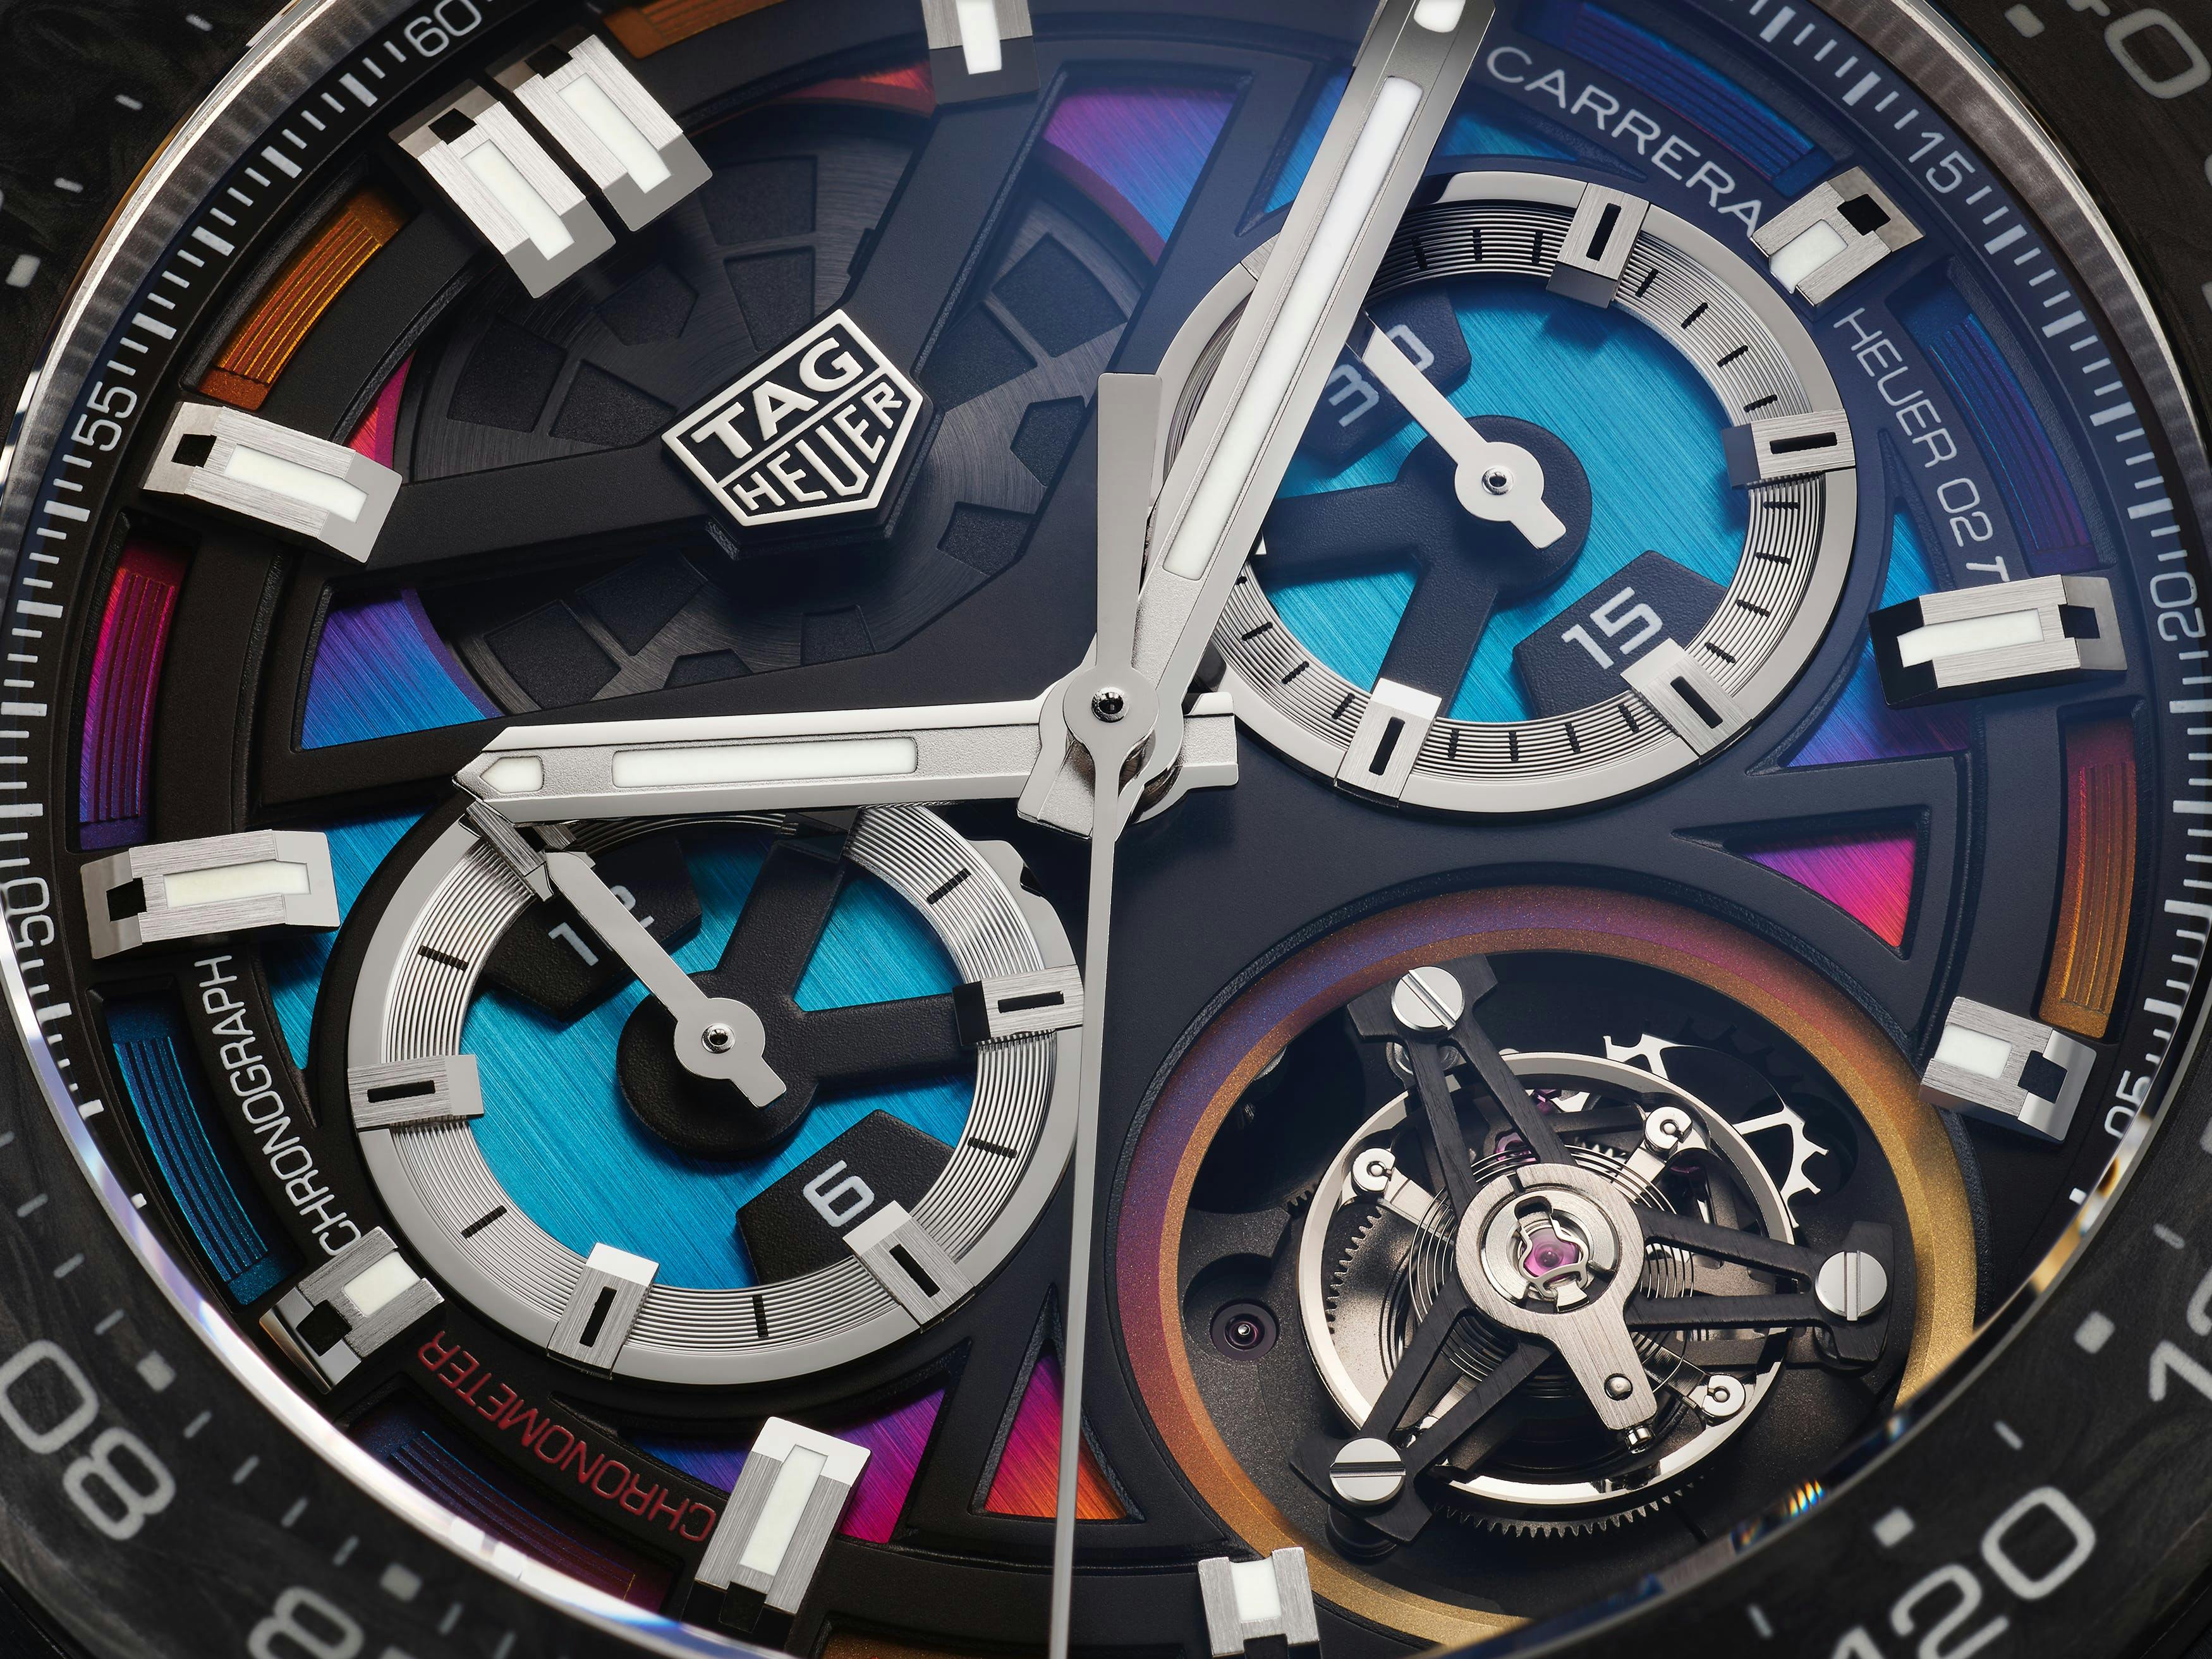 The Latest TAG Heuer Watch Is a Technicolour Dream